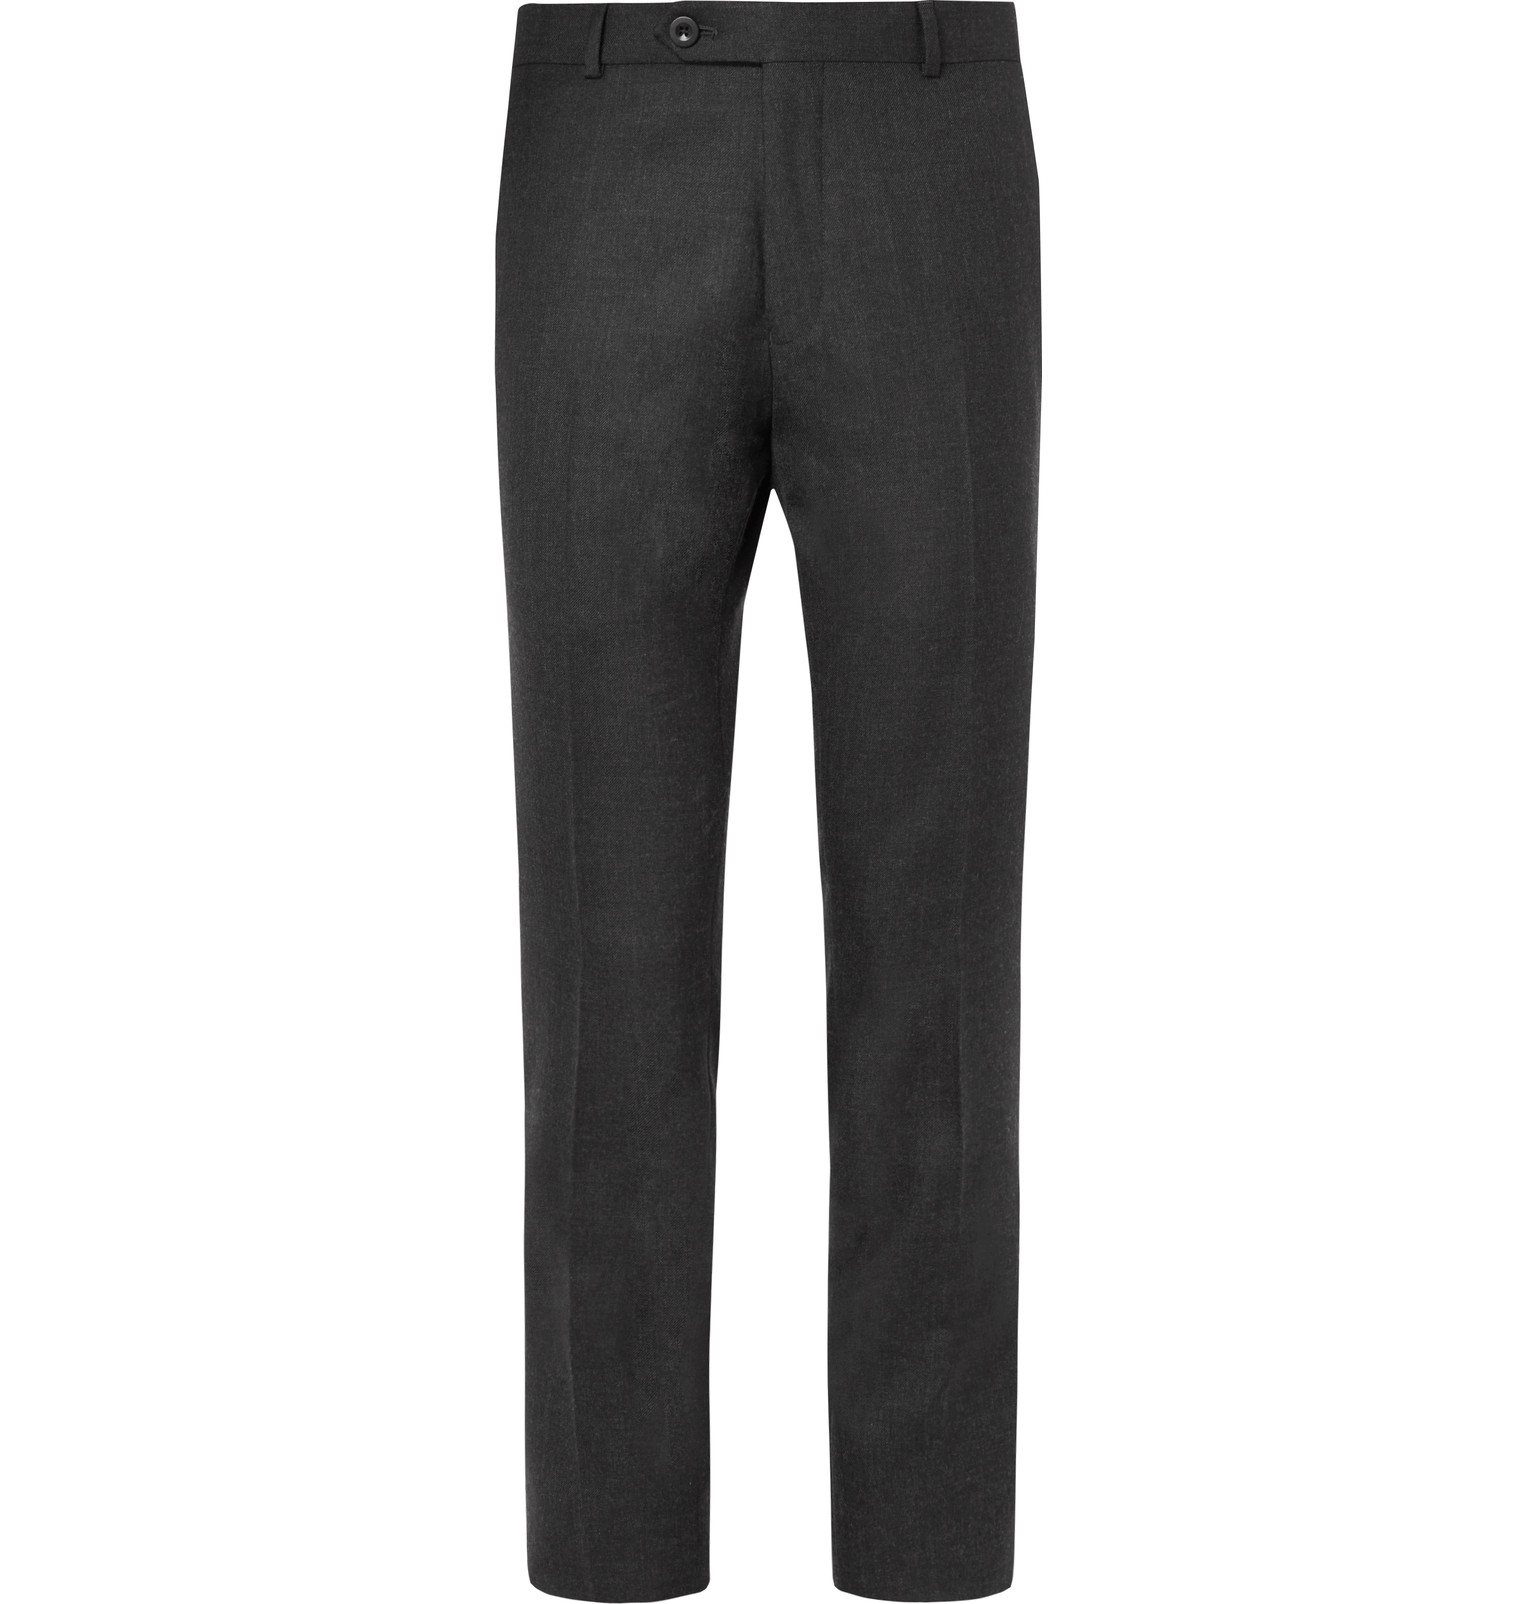 Mr P. - Slim-Fit Grey Worsted Wool Trousers - Men - Gray | The Fashionisto